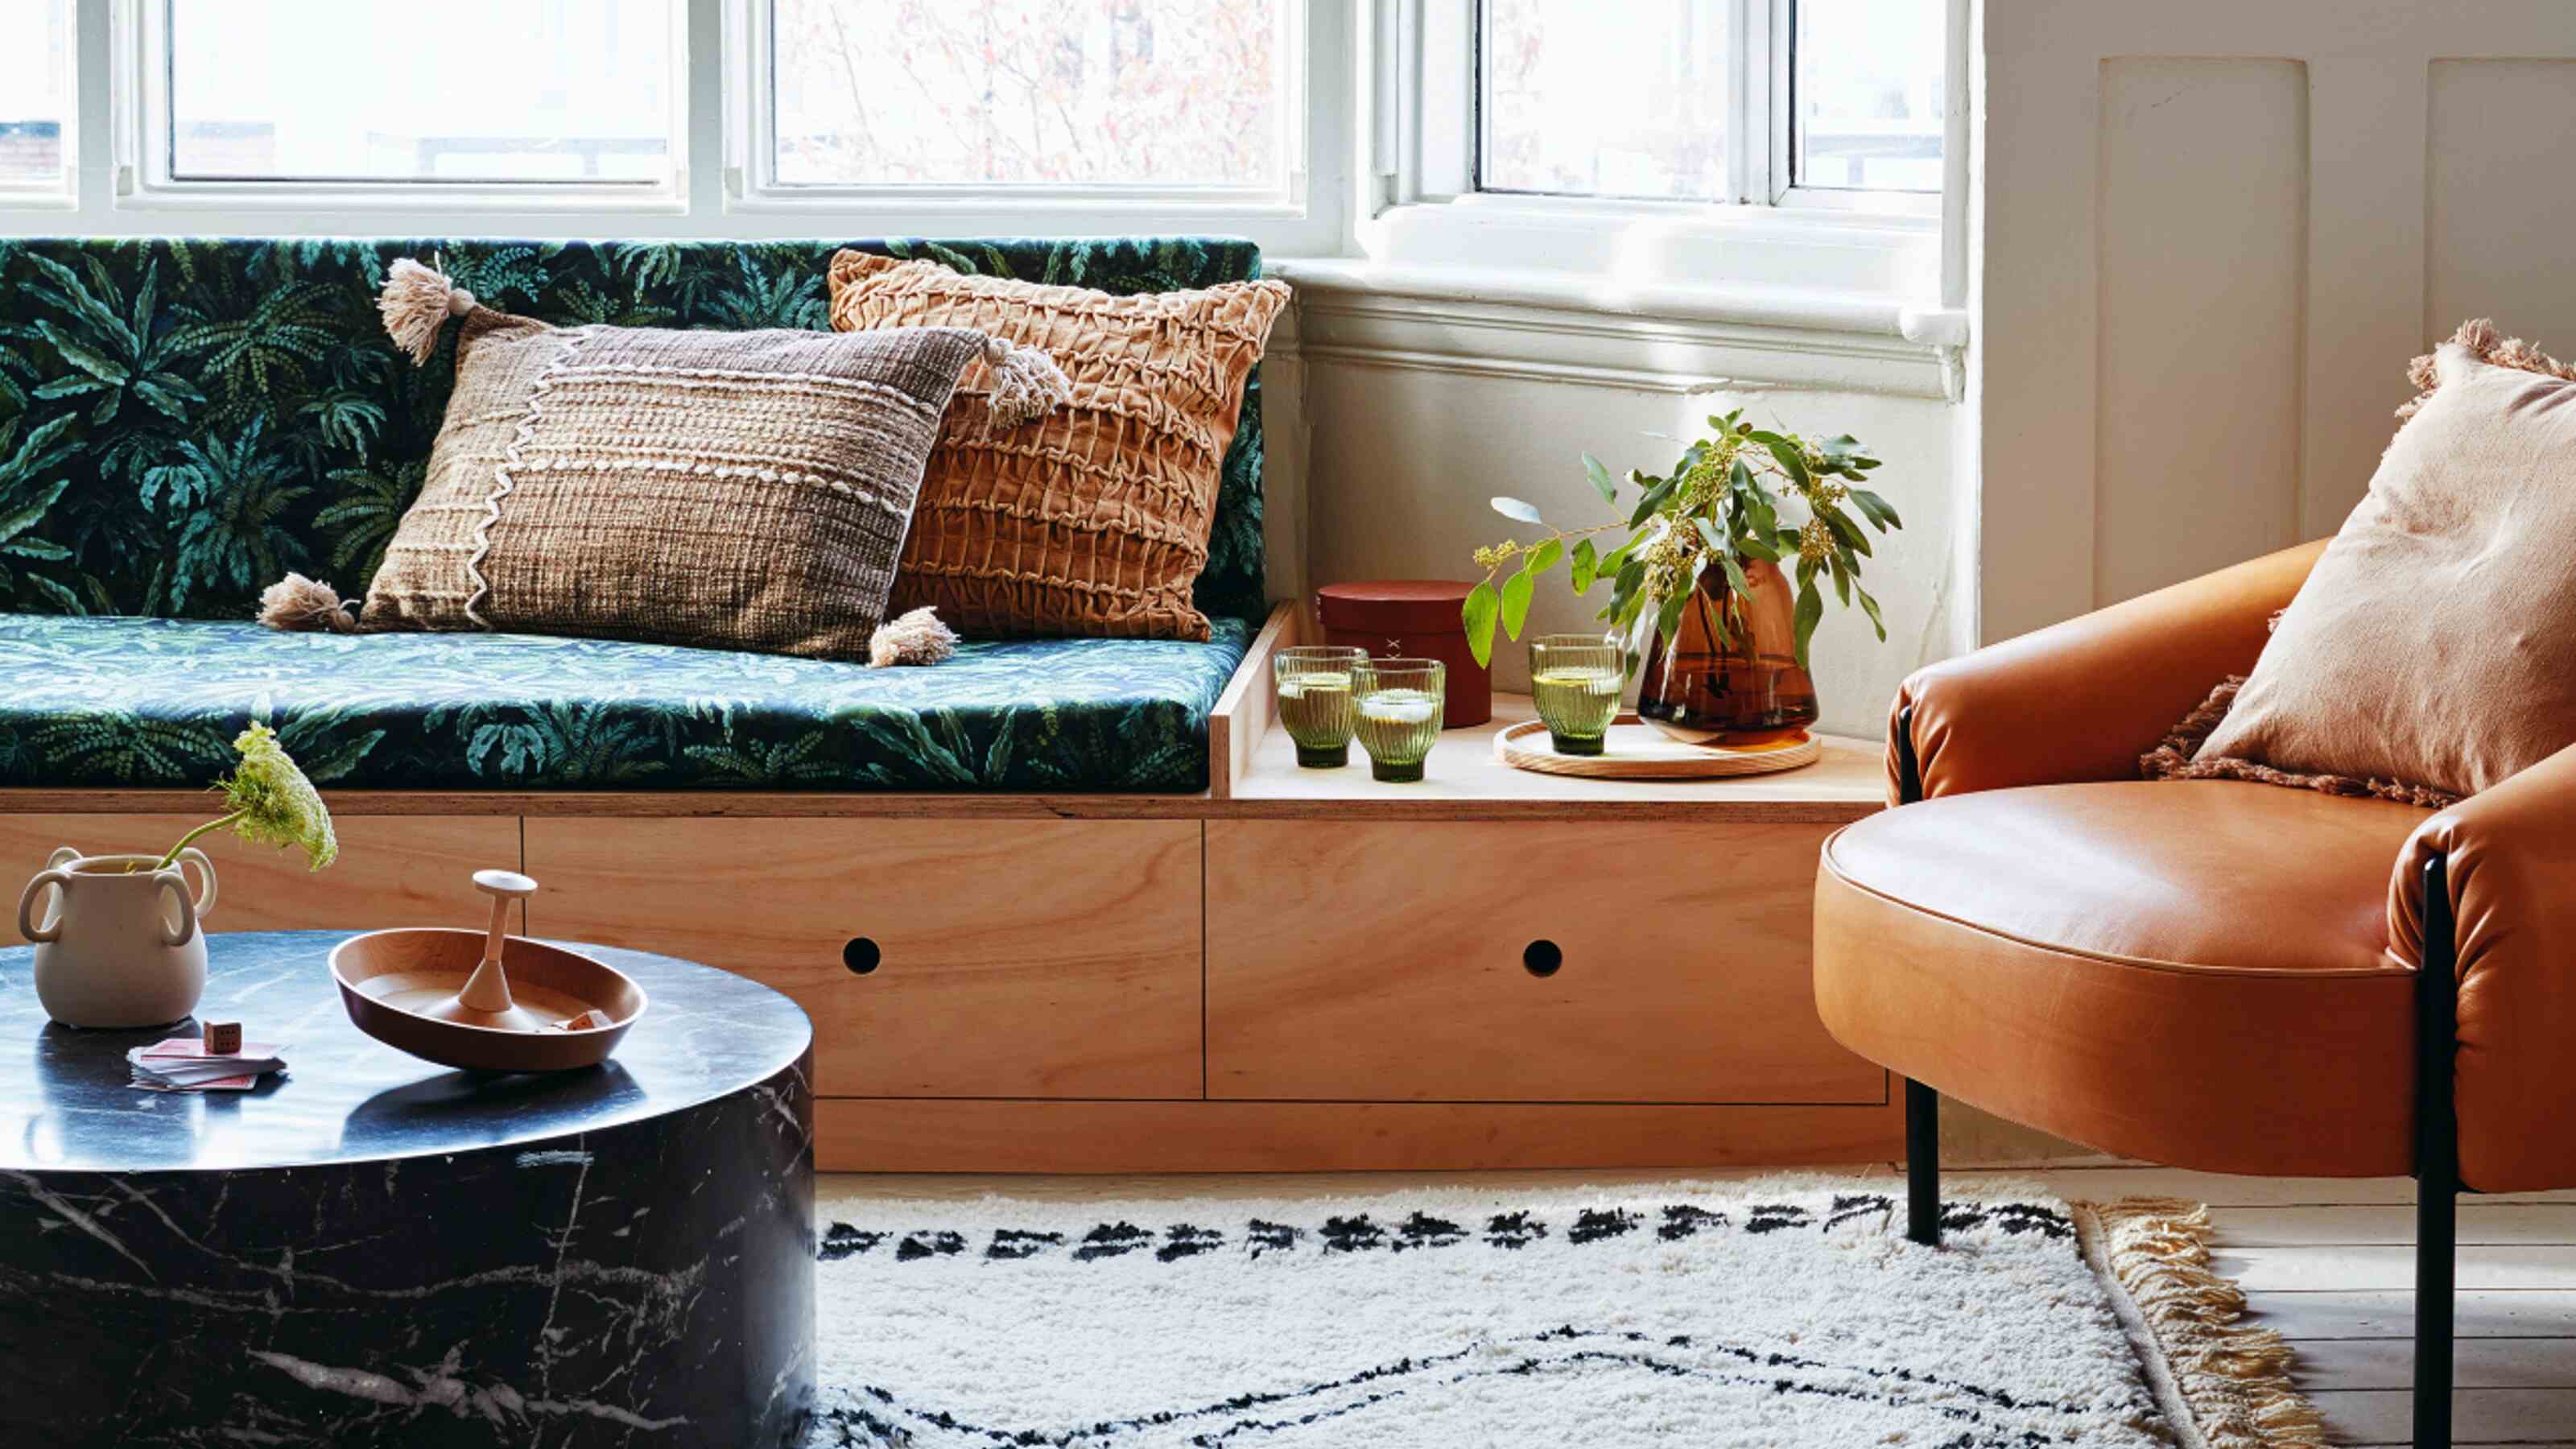 How To Fake Clean A Living Room Fast: 8 Expert Ideas